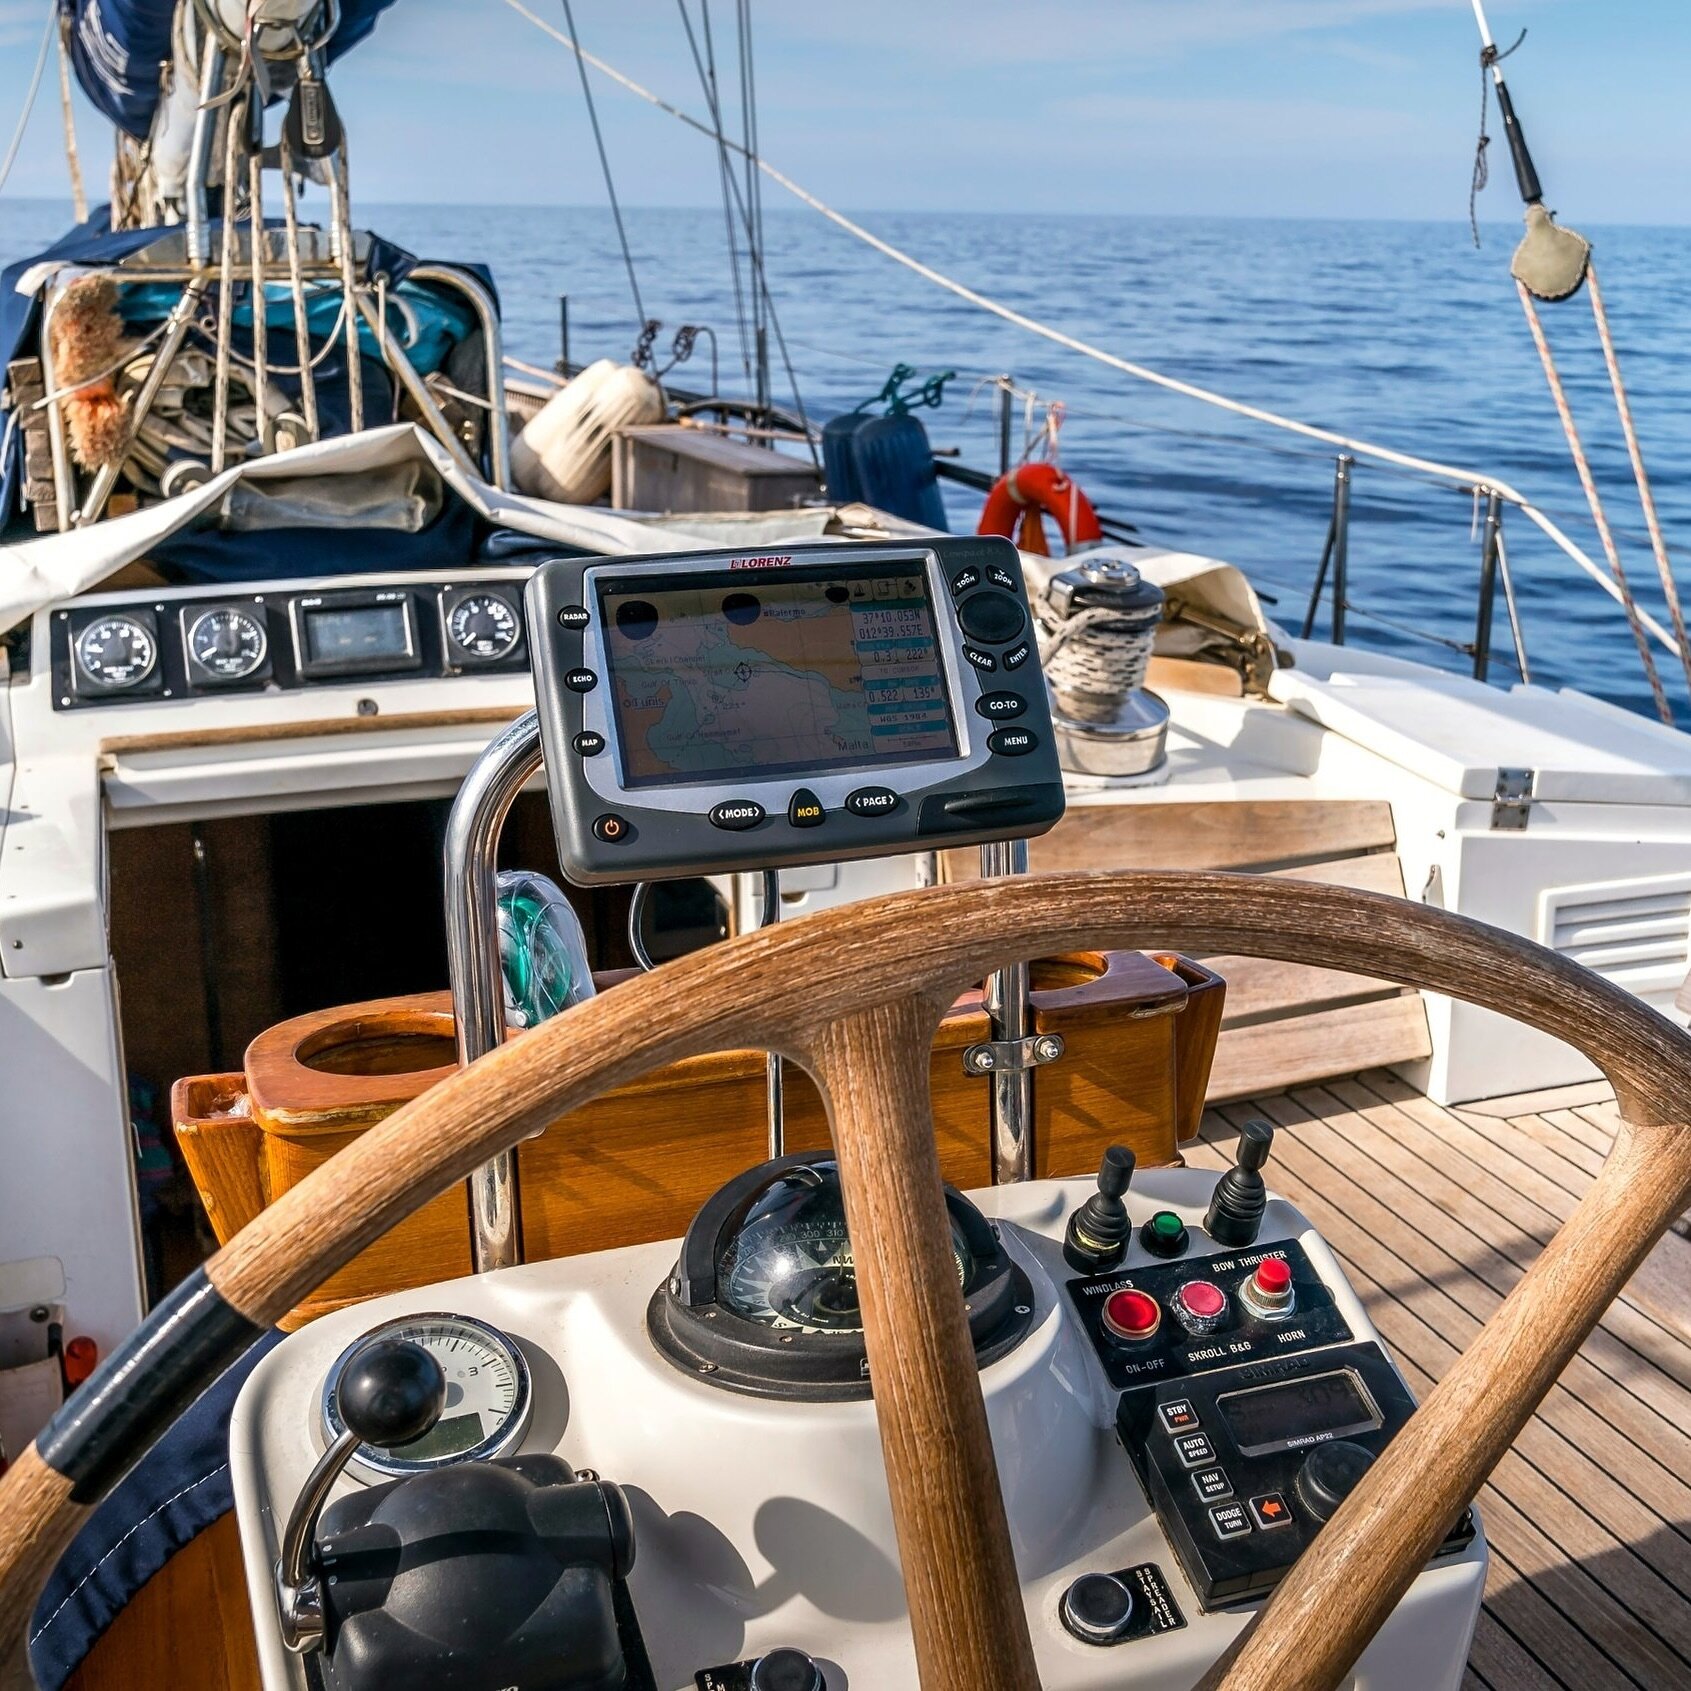 #Marine services? You bet! It&rsquo;s in the name: #Pacifitec.
That&rsquo;s right - we do all kinds of tech services for Pacific #yacht and #boat owners who #sail, #race, #fish, #cruise or otherwise need #genius level #tech #support for their on-boar